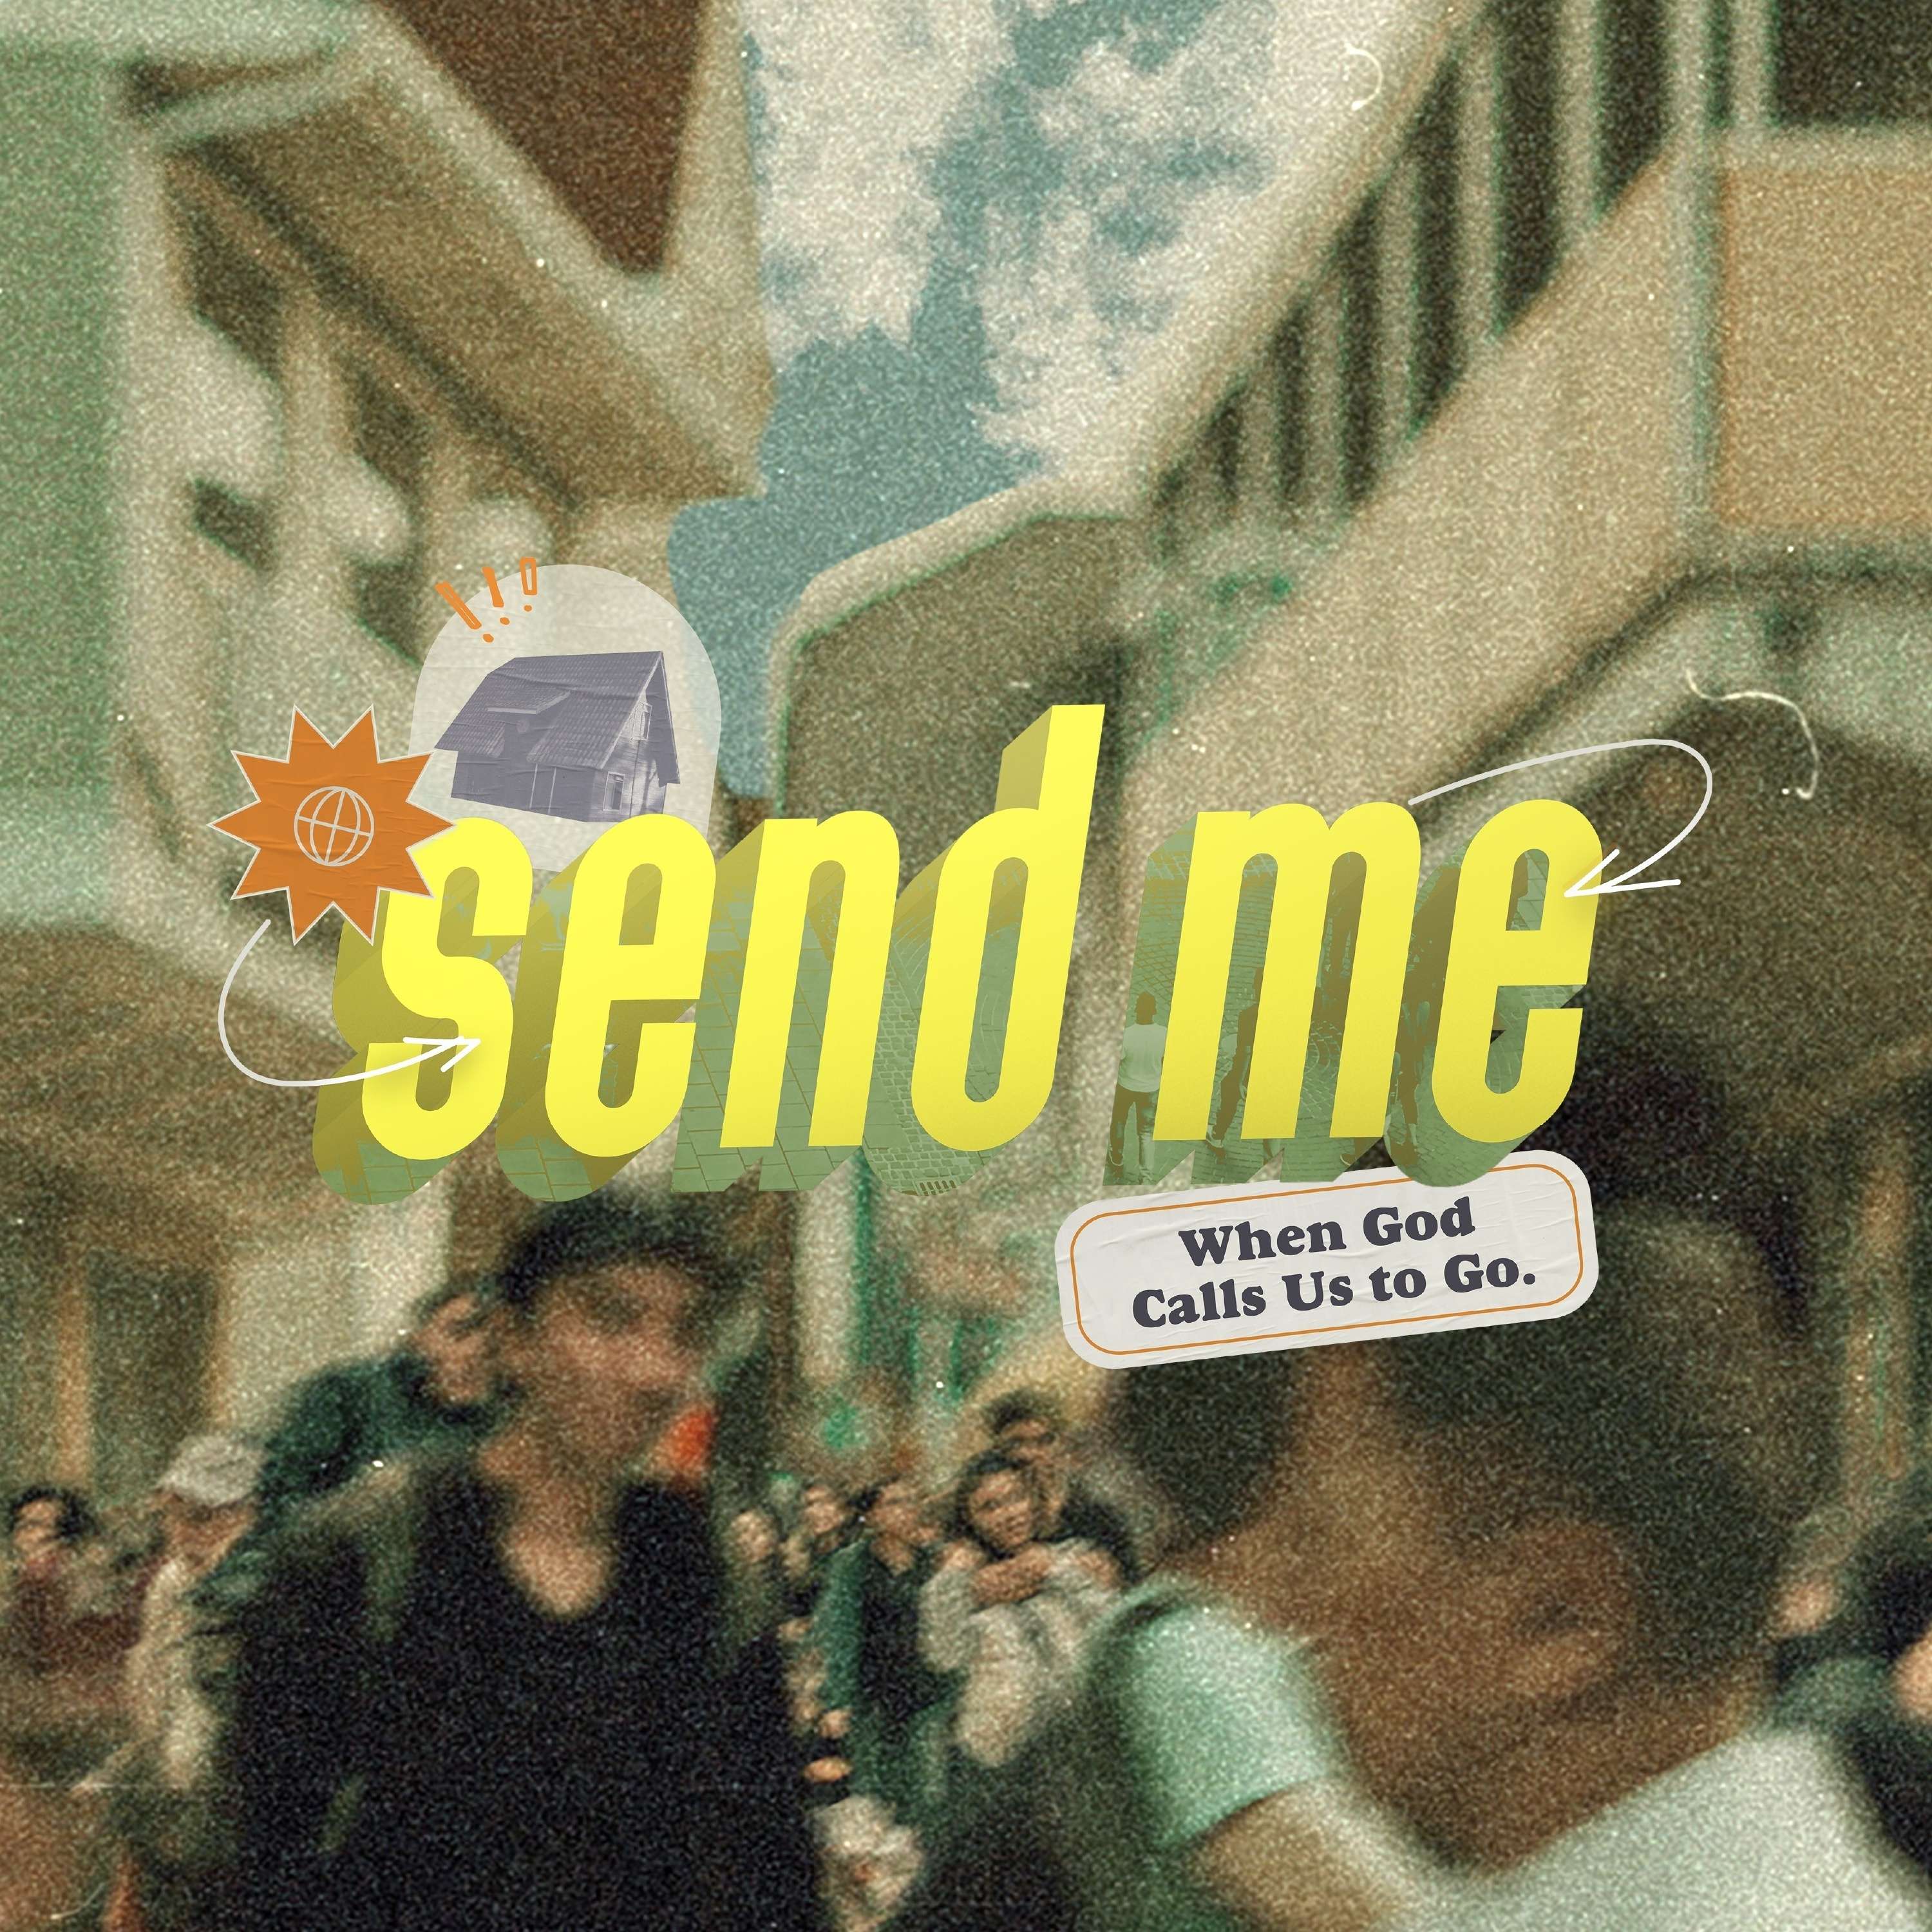 Send Me:  Part 1 - The Glory of God